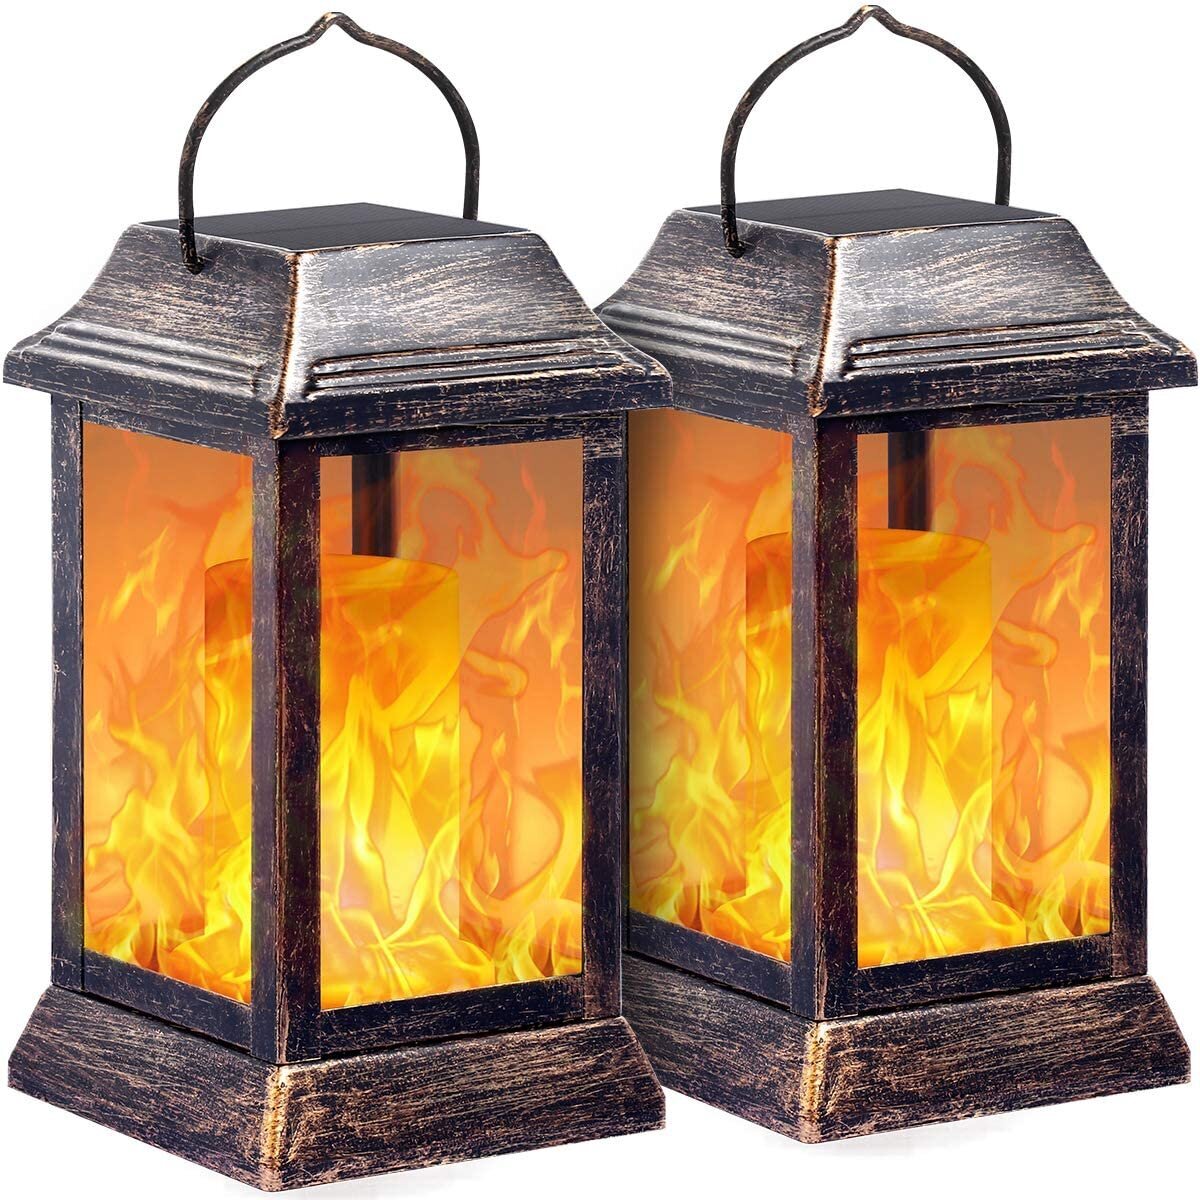 Fake fire lanterns in a traditional design 